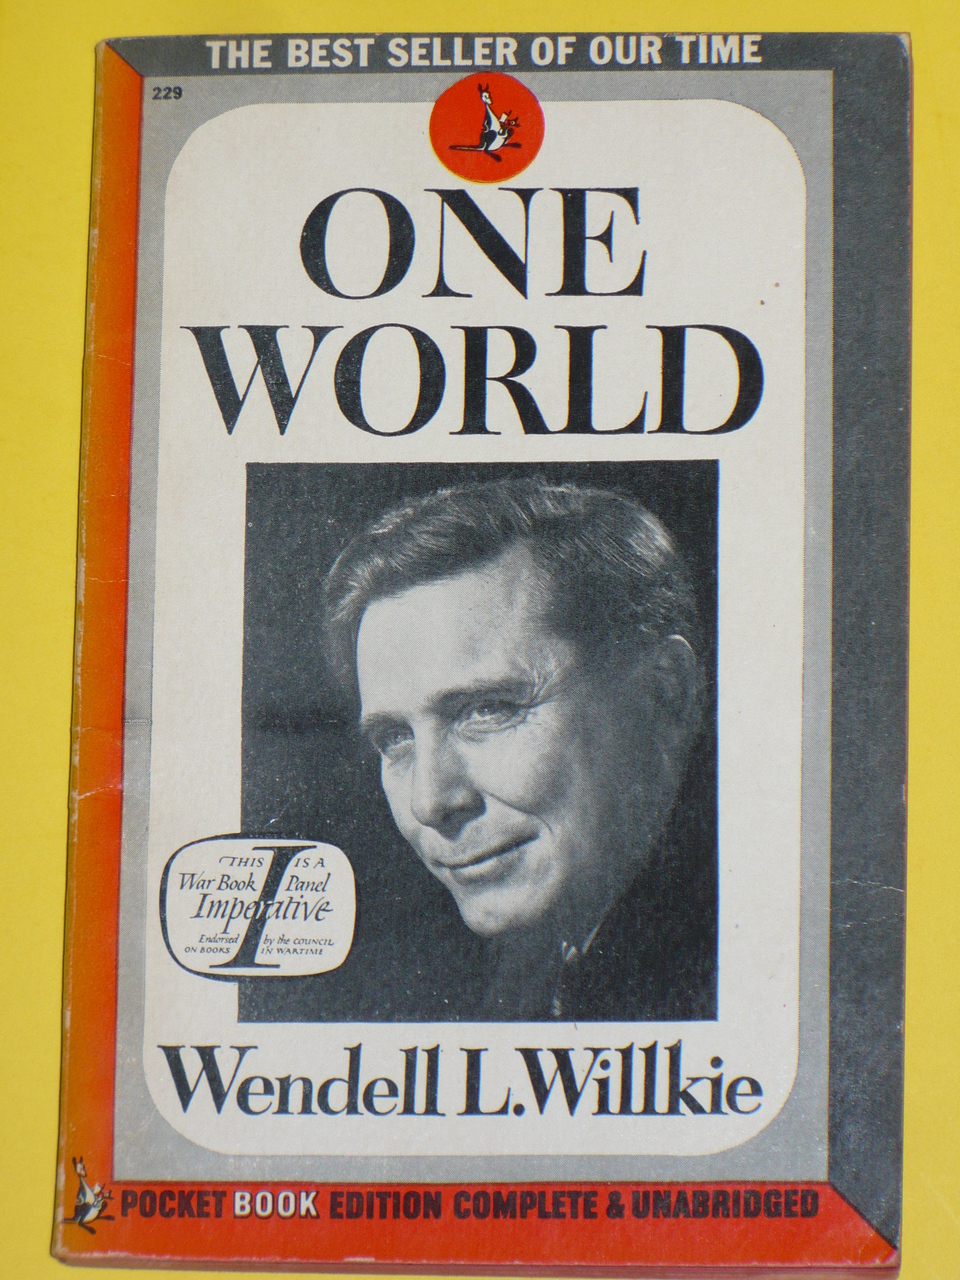 One World by Wendell Willkie. Image courtesy of Doerbooks.com.